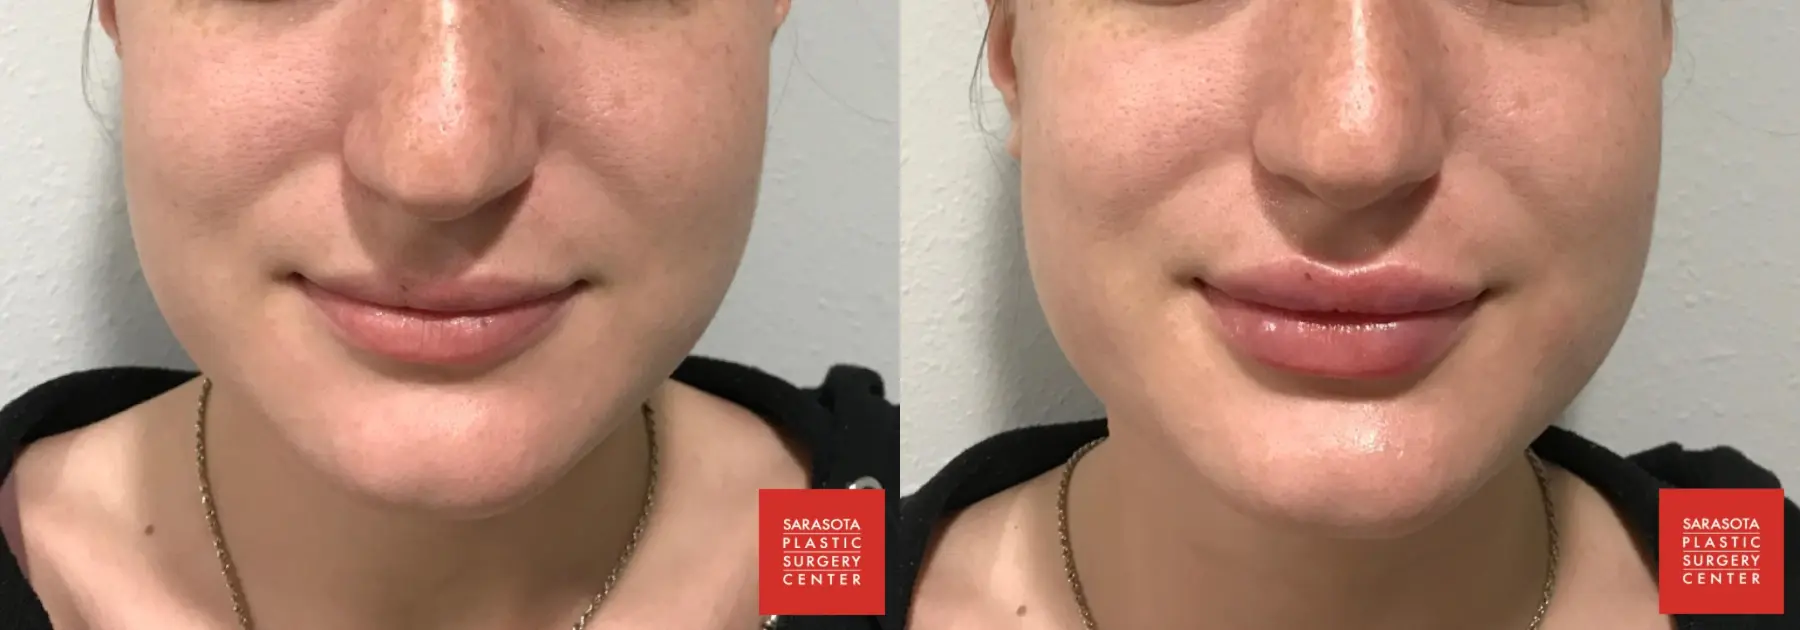 Injectables - Face: Patient 3 - Before and After  